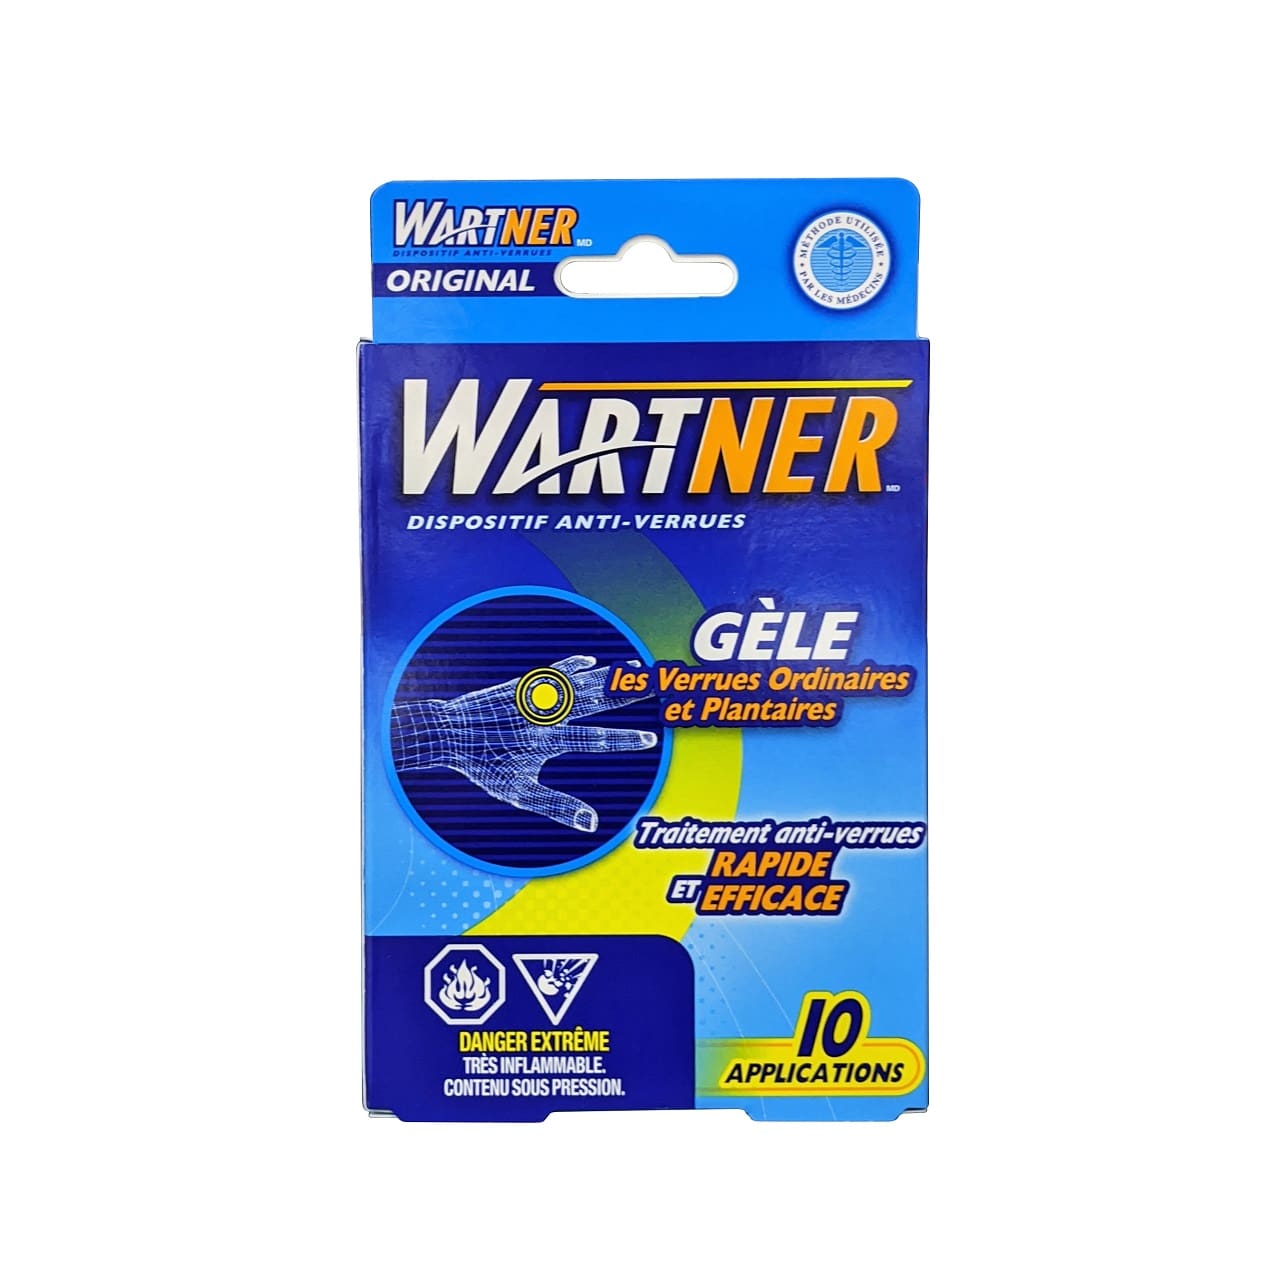 Product label for Wartner Original Wart Removal System (10 count) in French